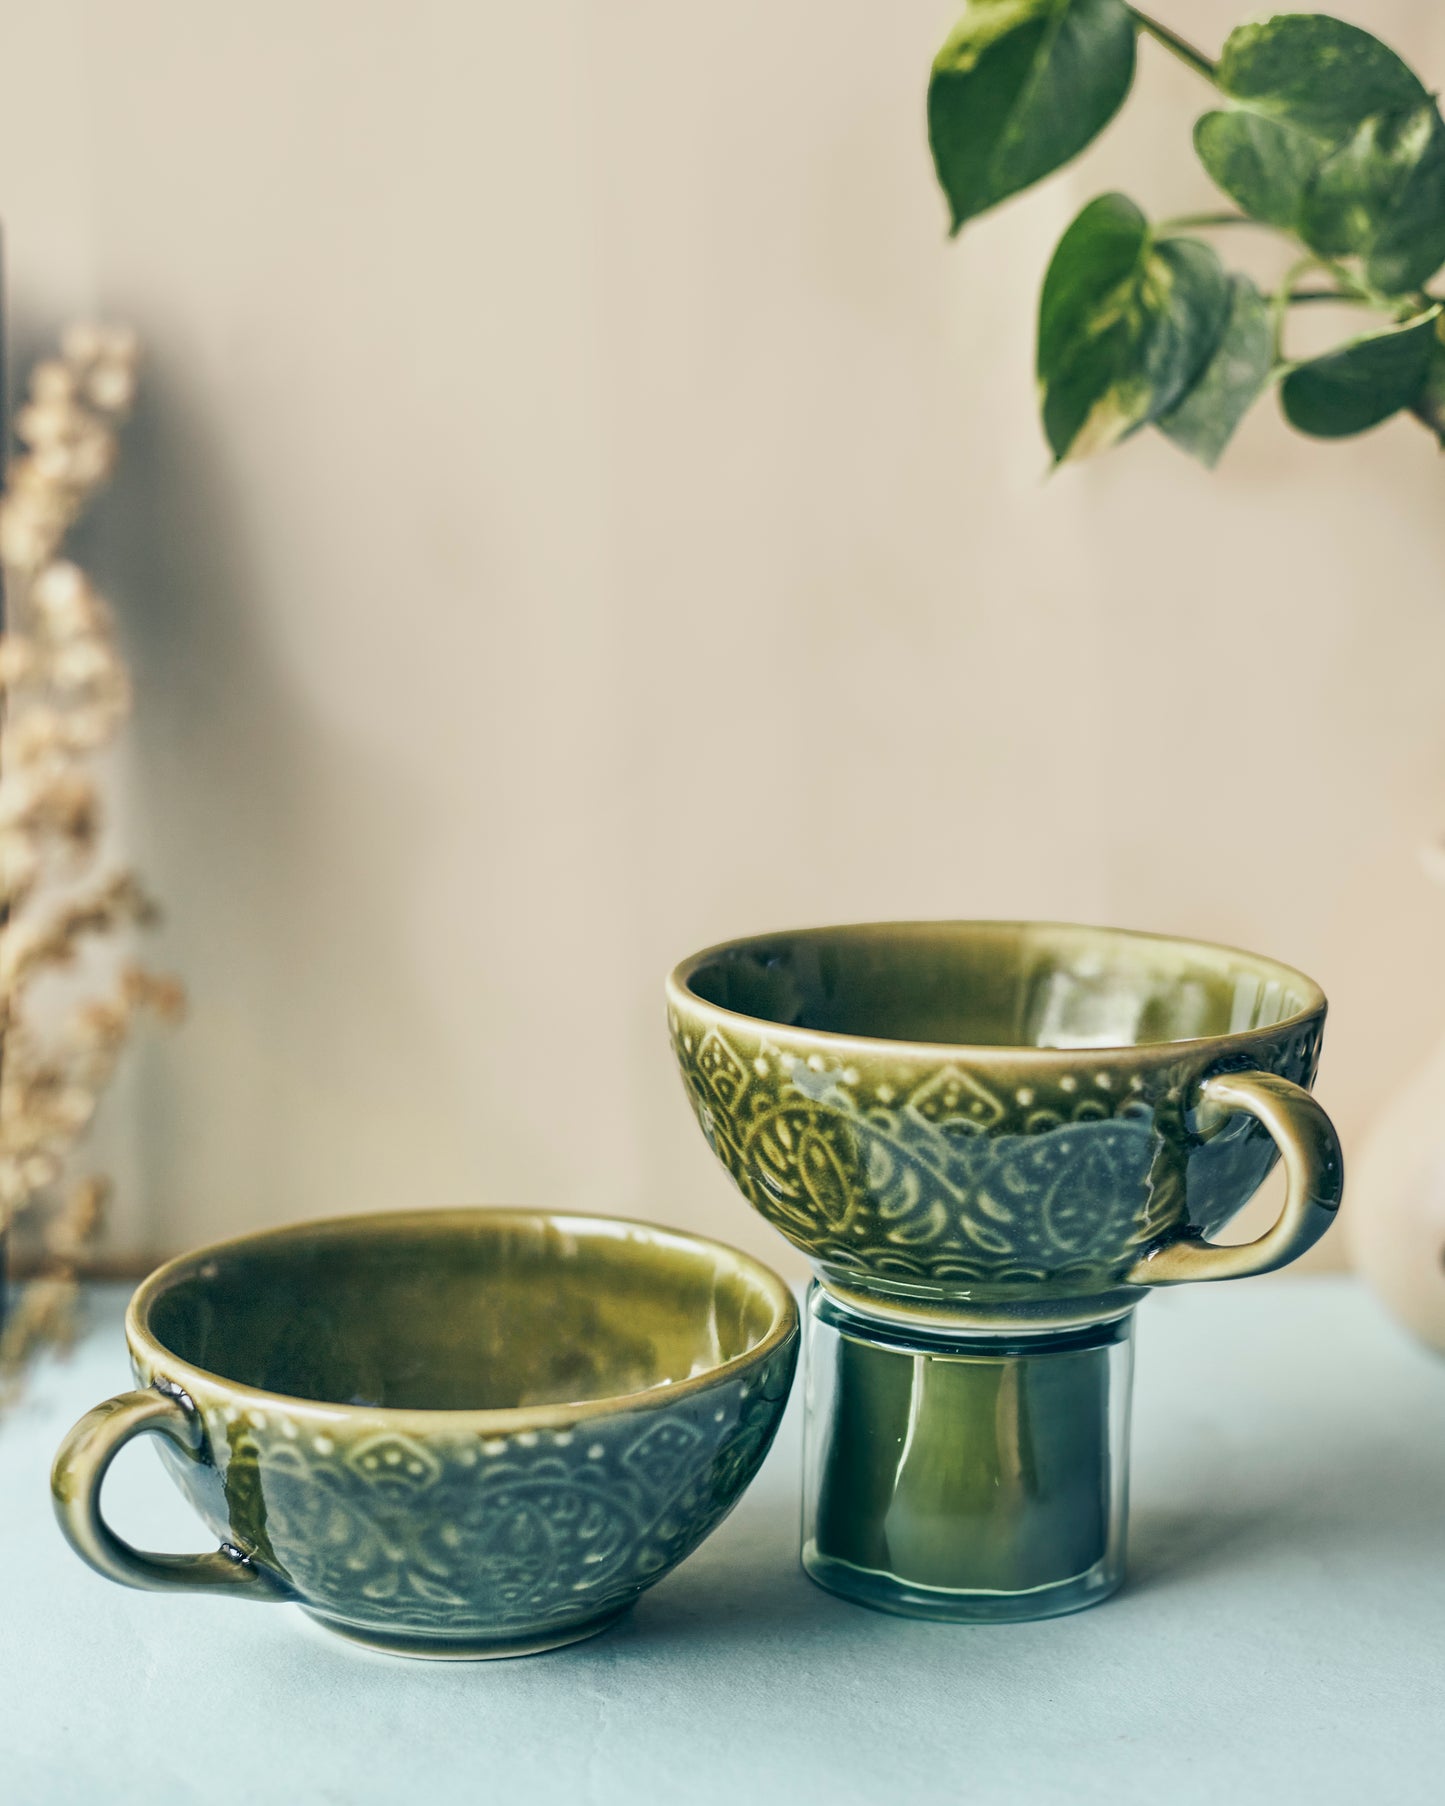 Emerald Harmony: Green-Colored Soup Bowls(Set of 2)